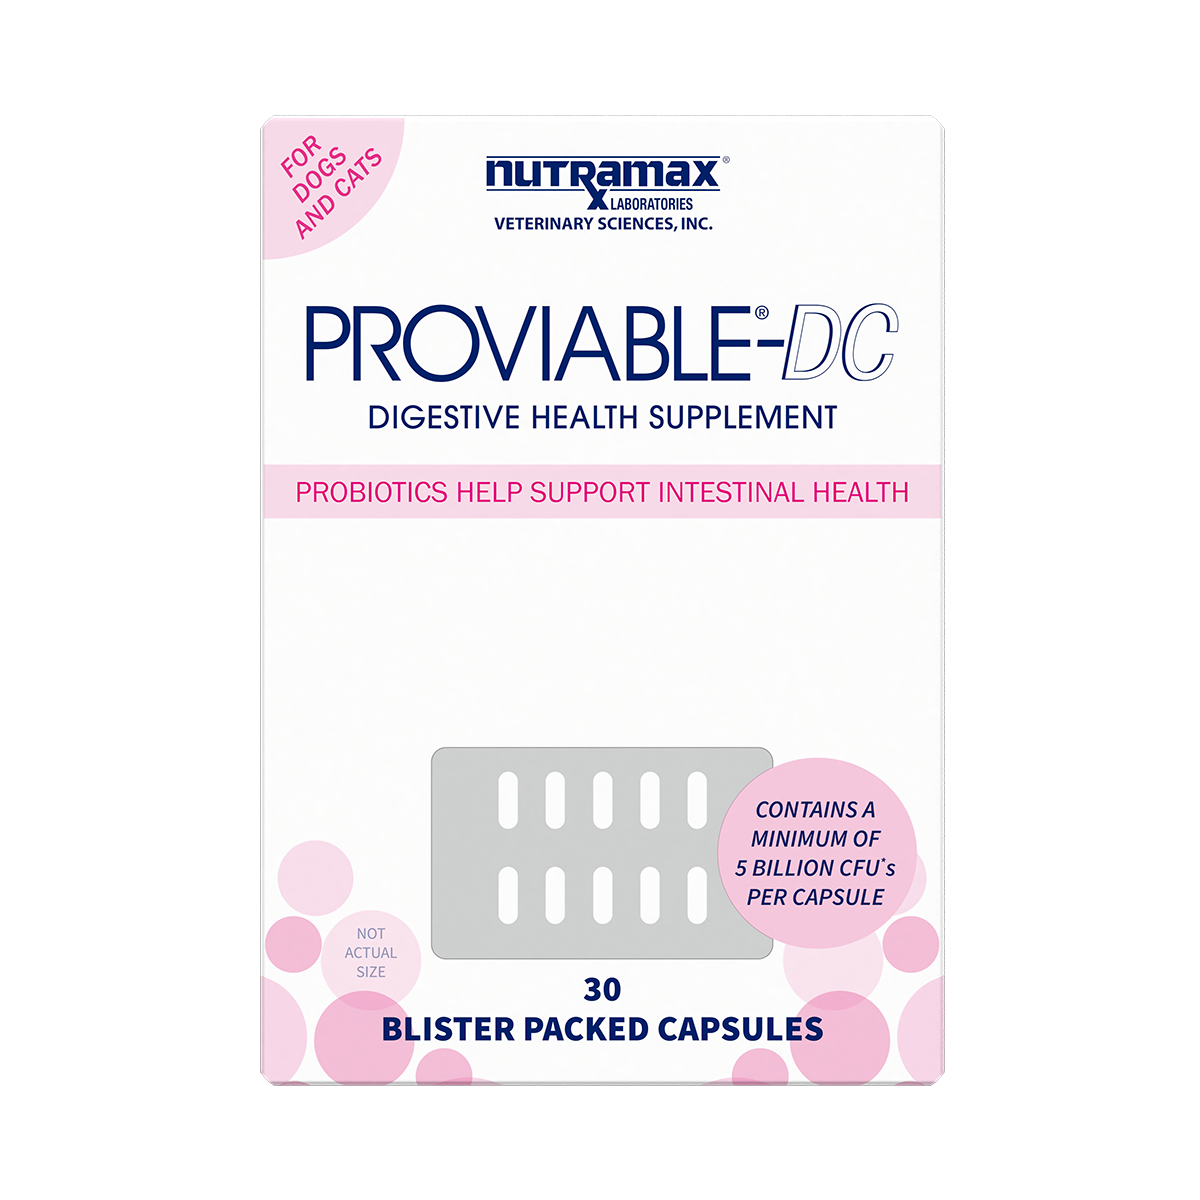 Nutramax Proviable Digestive Health Supplement Multi-Strain Probiotics and Prebiotics for Cats and Dogs Capsules